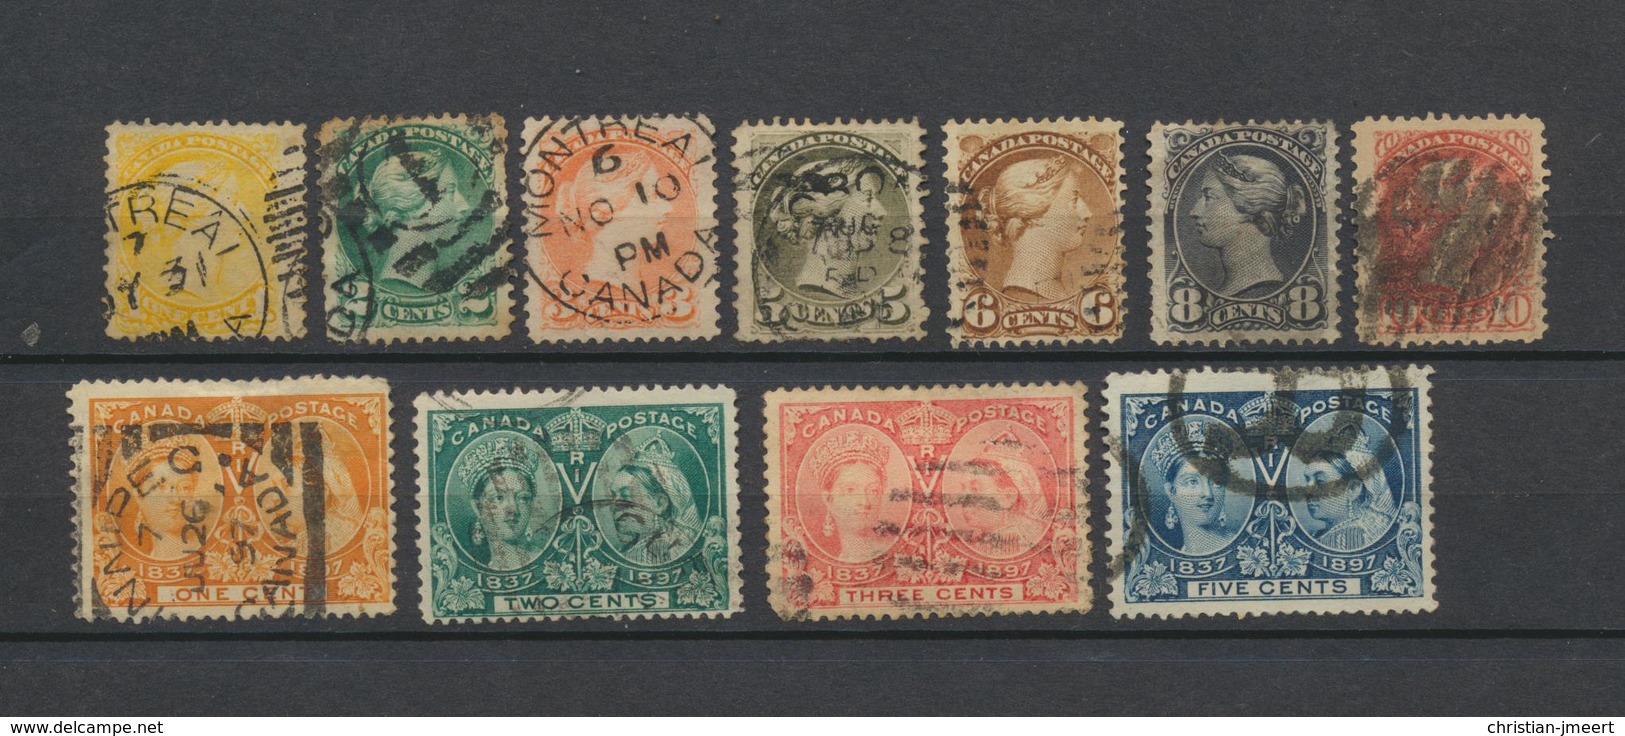 Collection CANADA - Early To 1940 - High-Value - Not Thinned - Not Damaged - 108 V.- Free Registred Mail - Collections